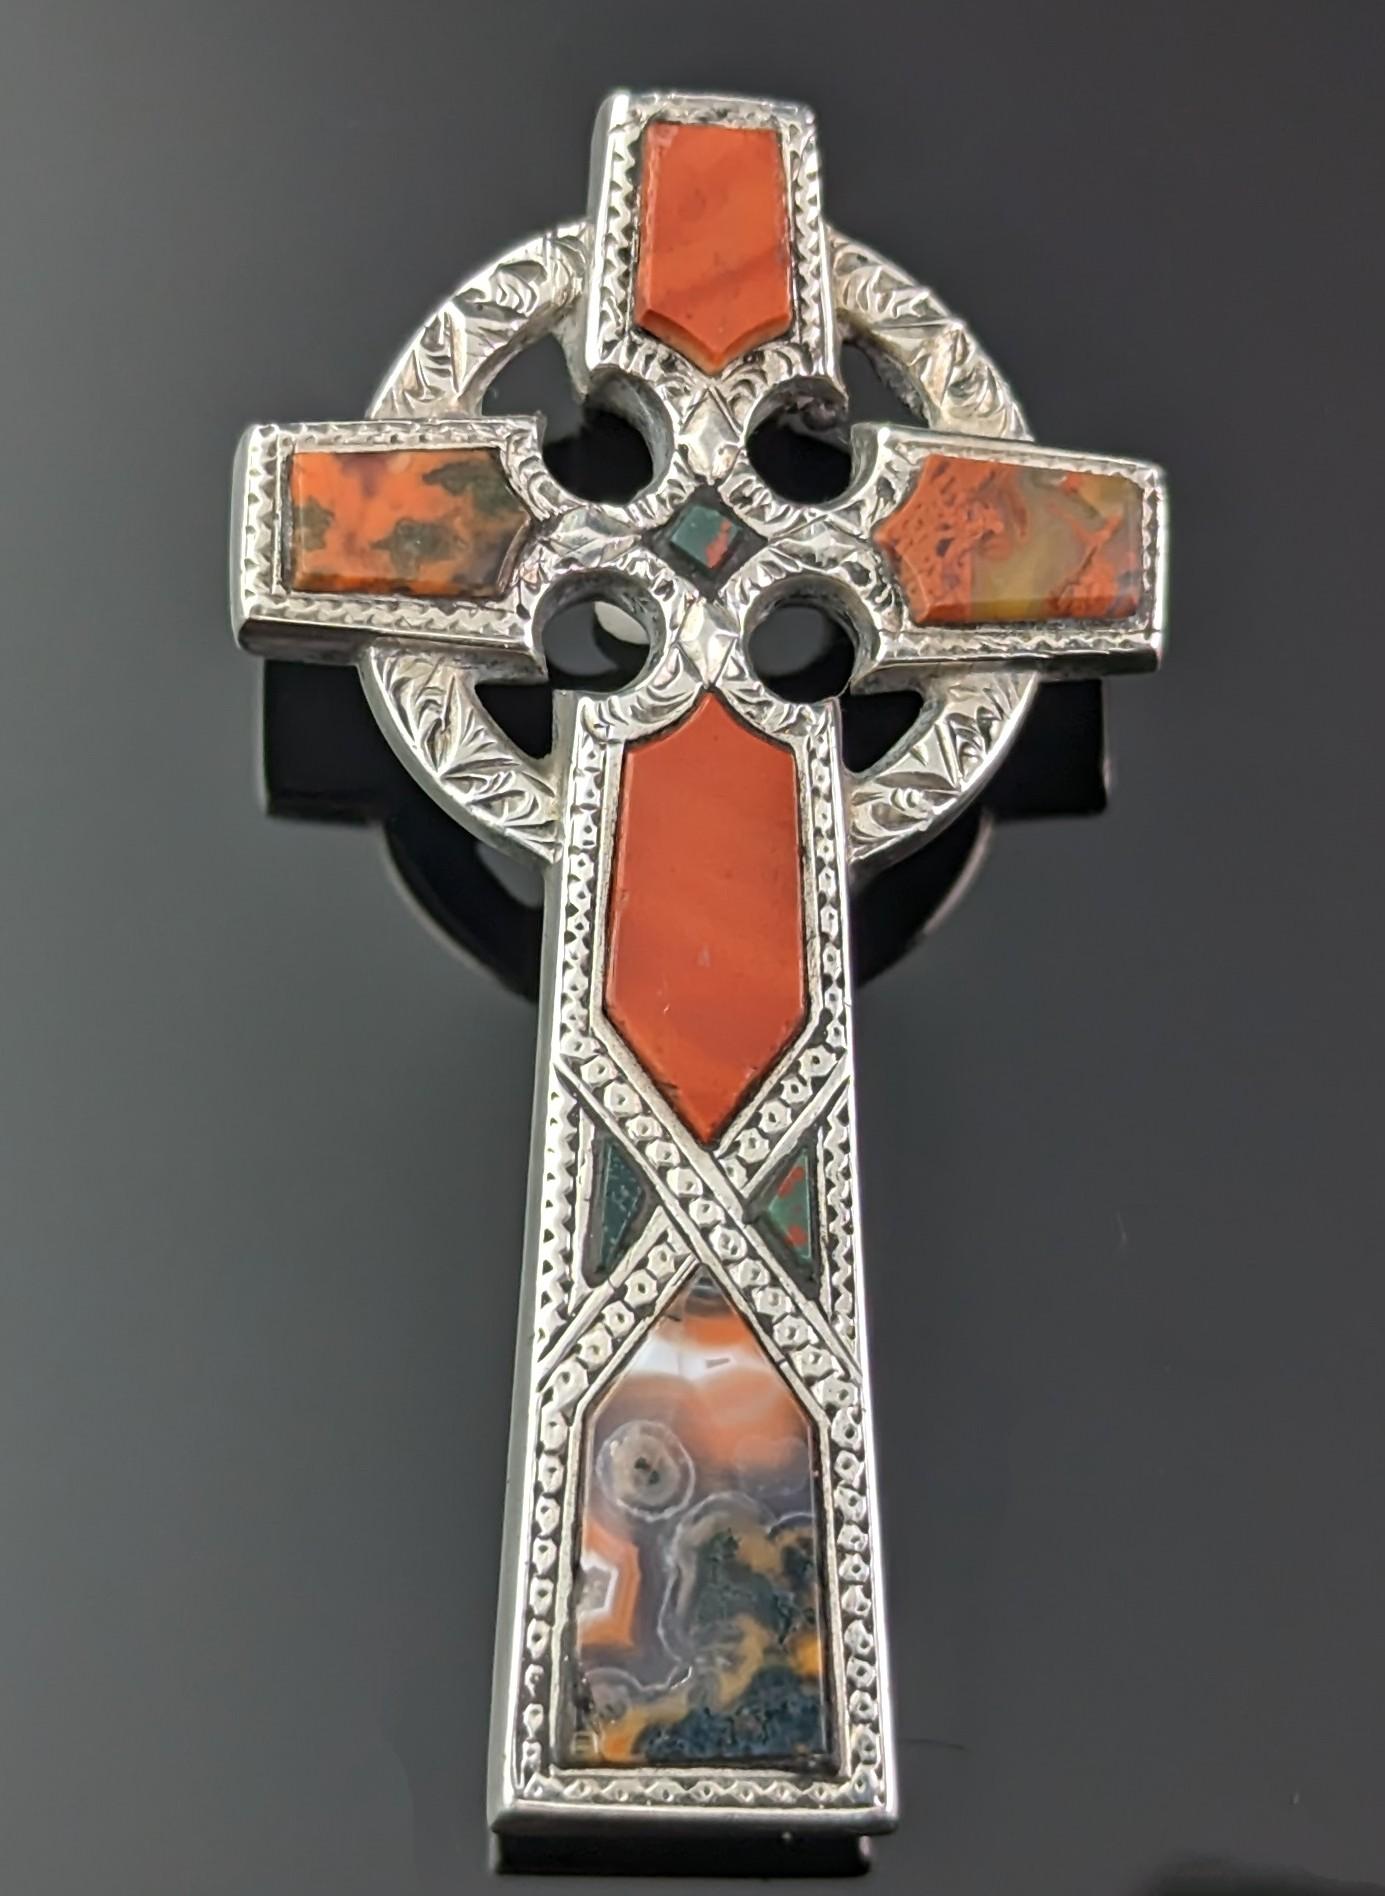 This is just a stunning and grand antique, Scottish agate and Silver brooch designed as a Celtic Cross, an attractive brooch or pin from the Victorian era.

The cool silver cross is chased and engraved to the front with a smooth reverse, the main